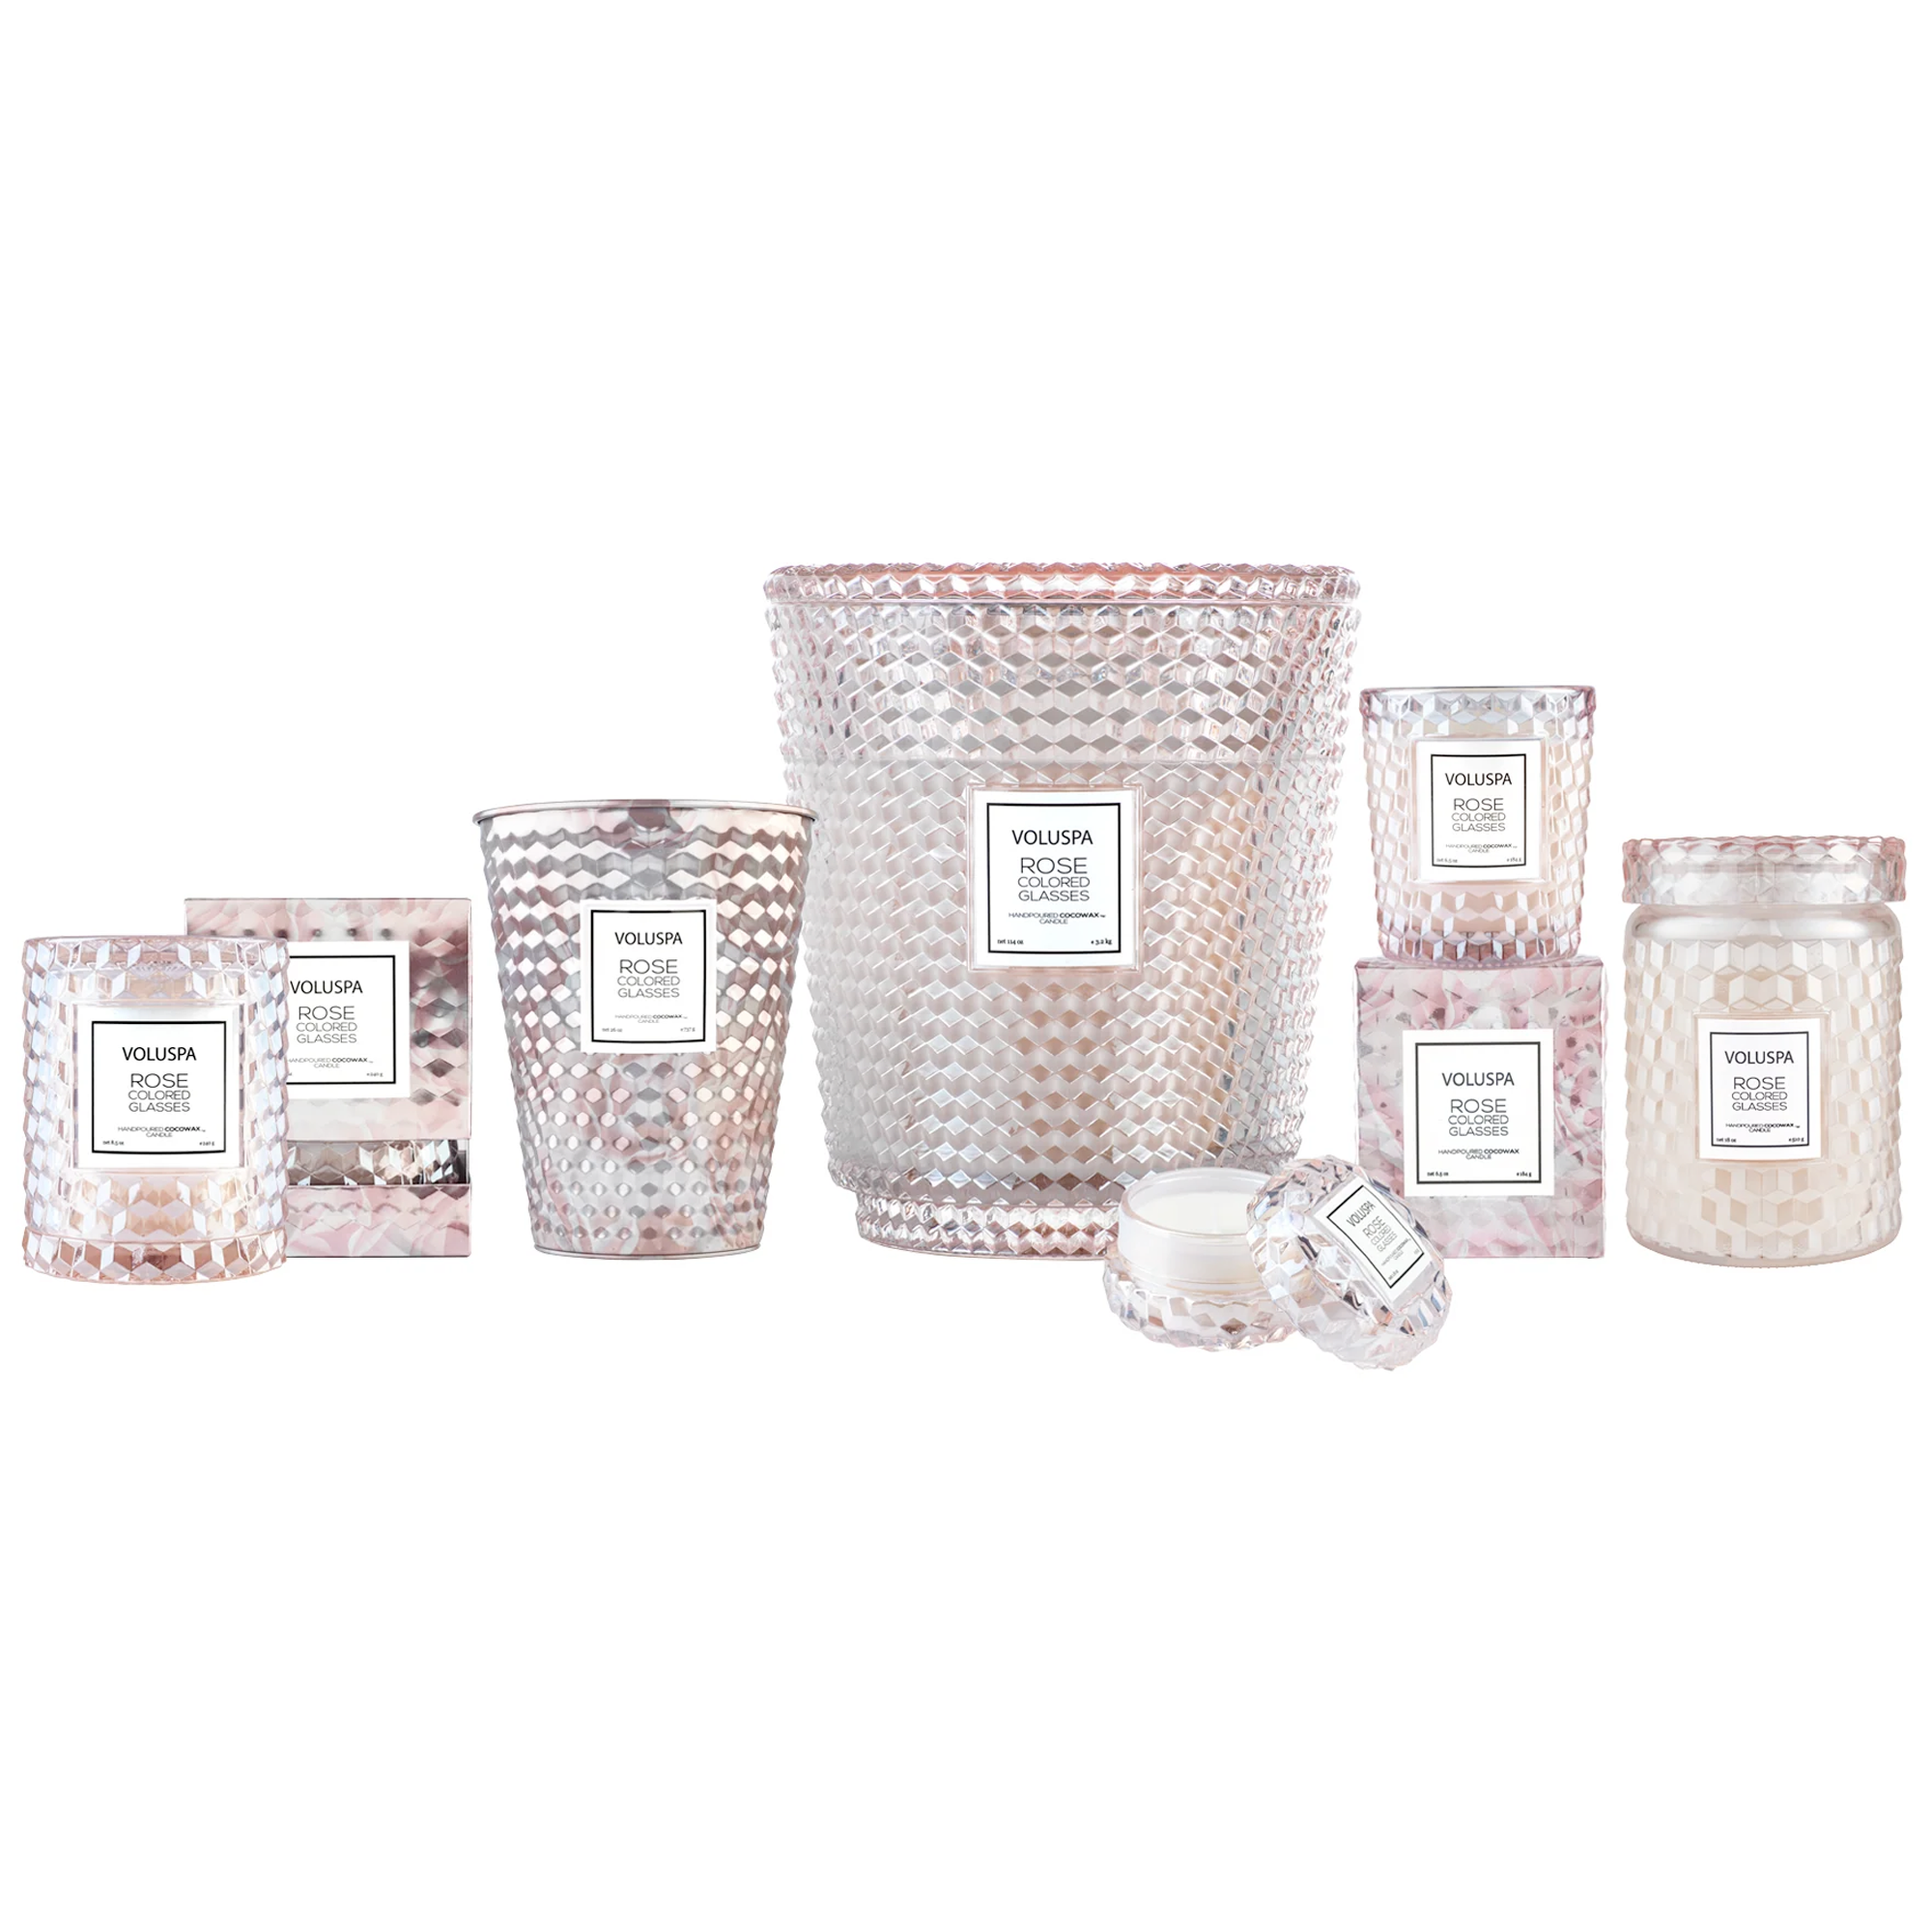 Rose Colored Glasses Collection, Voluspa - RSVP Style